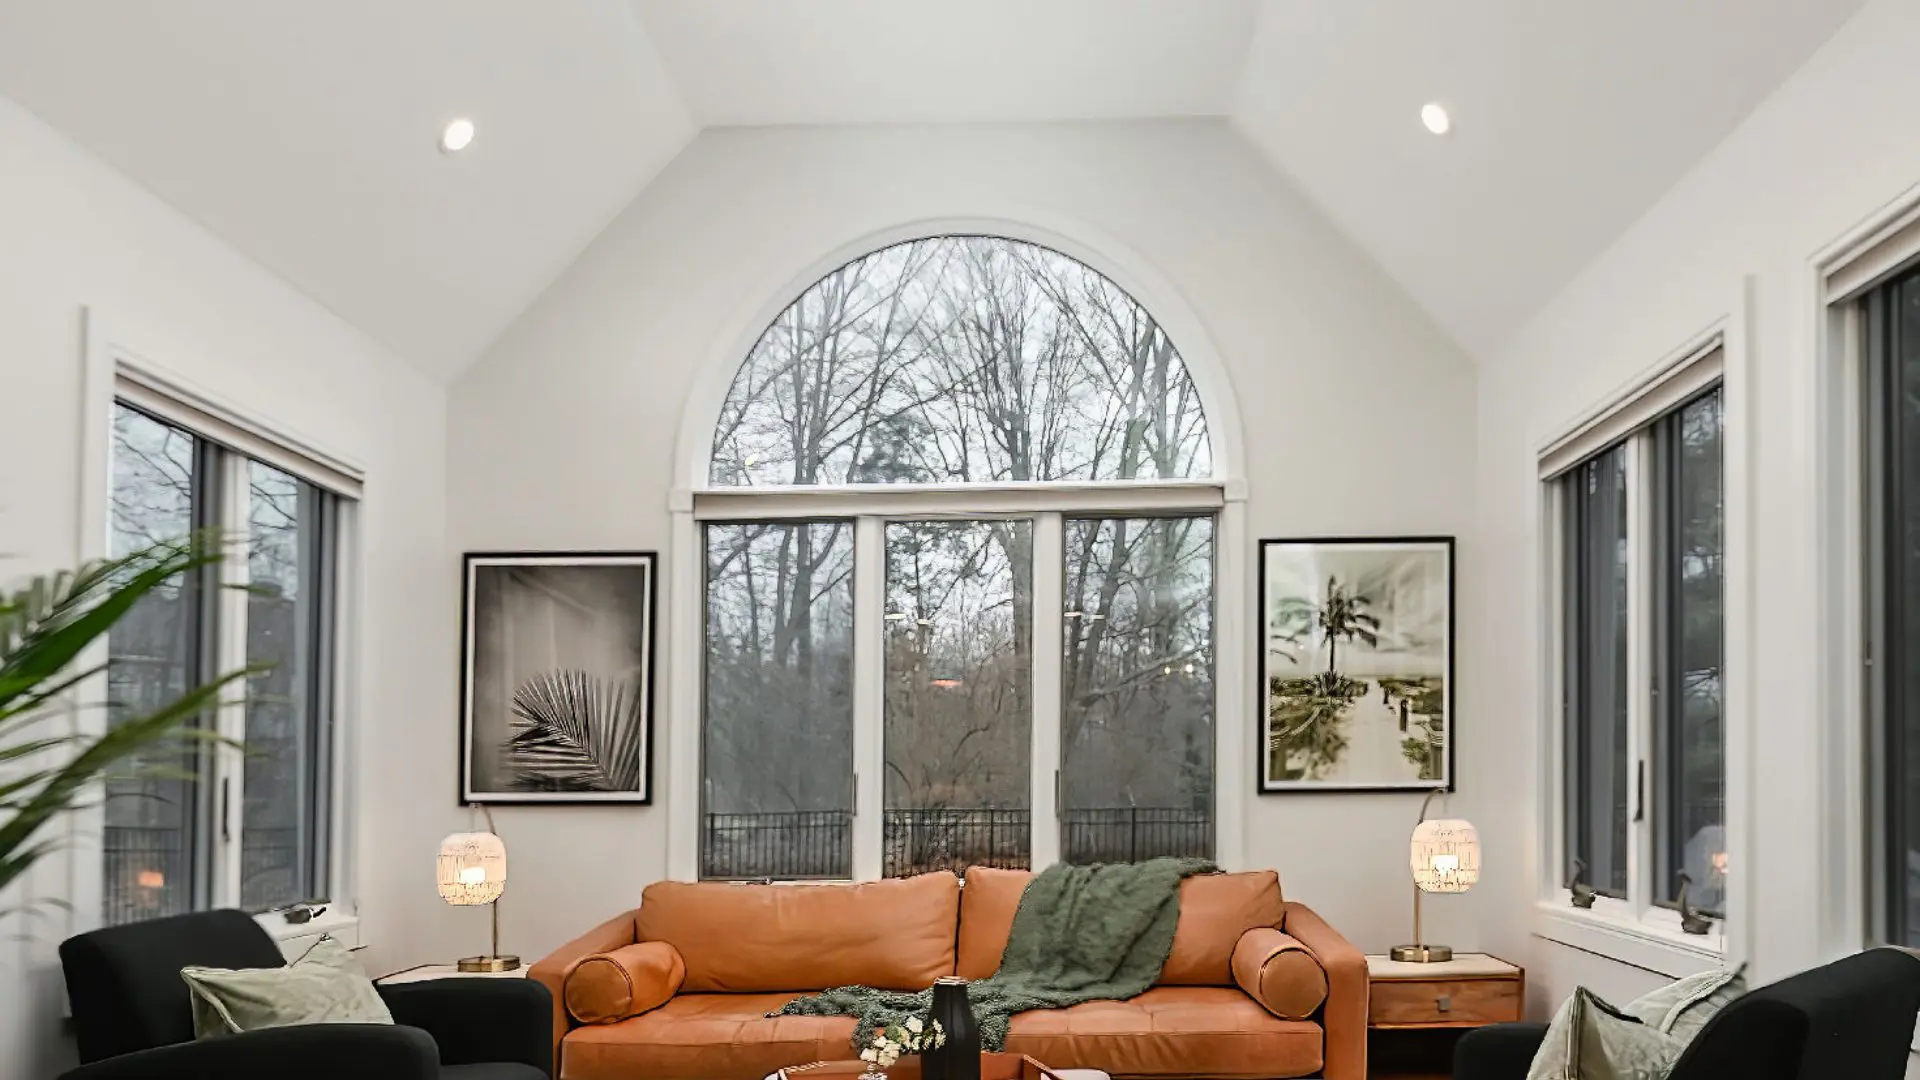 Vaulted ceiling design in a client's home by Ryann Reed Design Build.